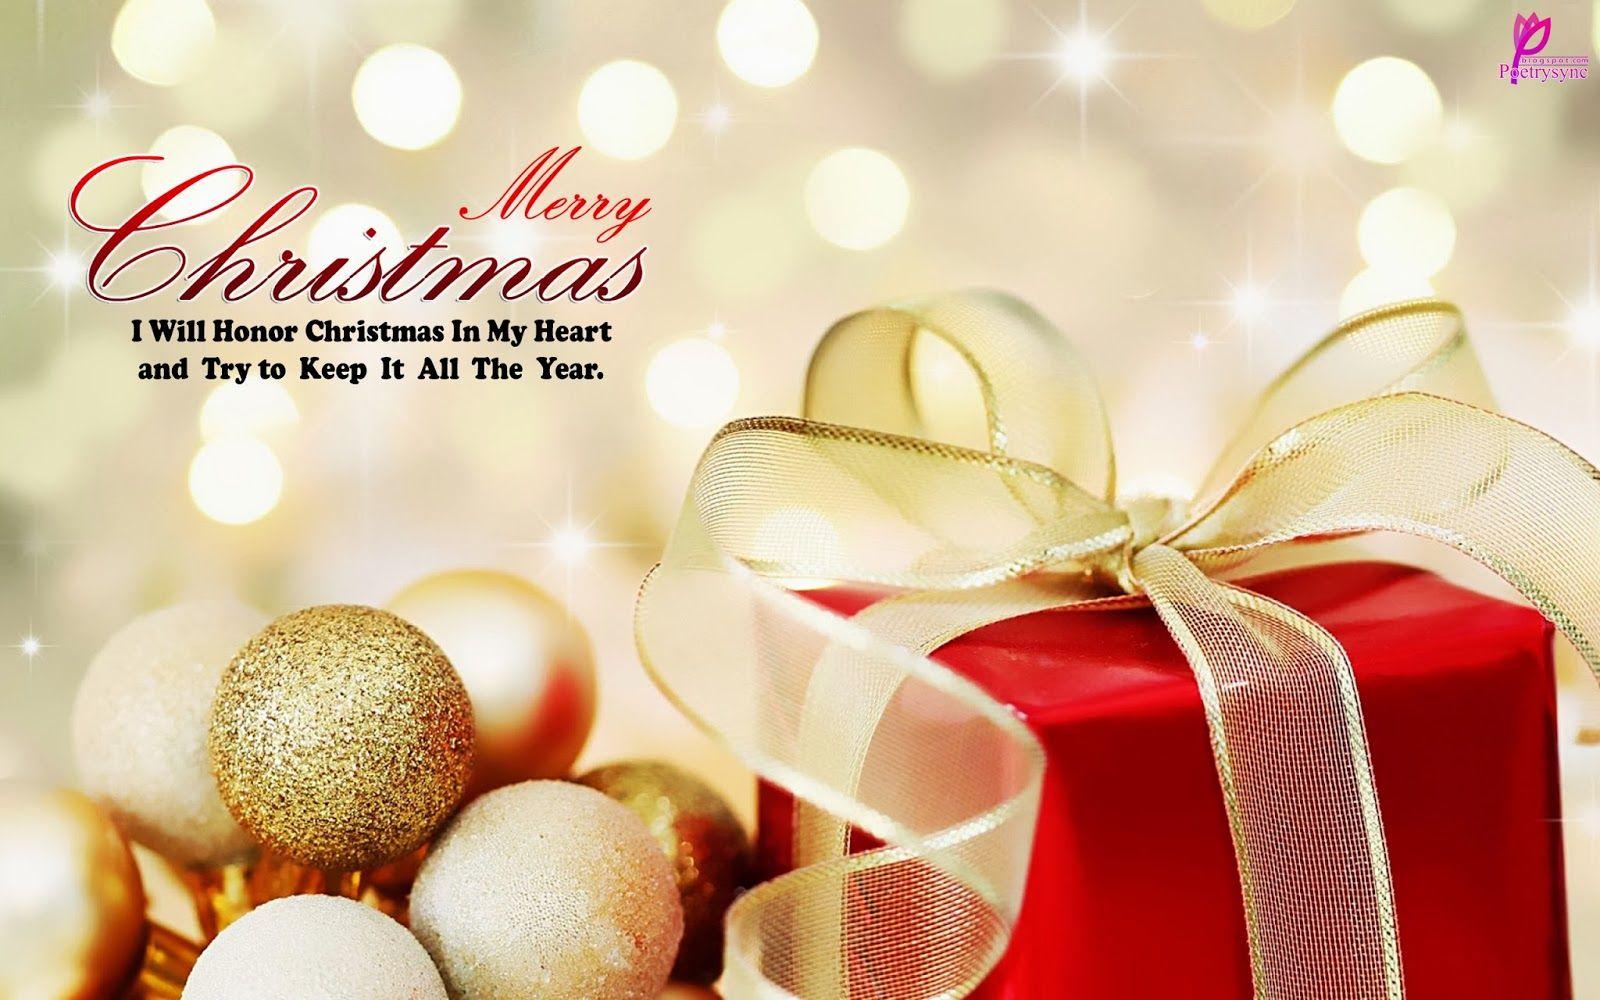 Christmas Cards And Gifts Wallpapers - Wallpaper Cave